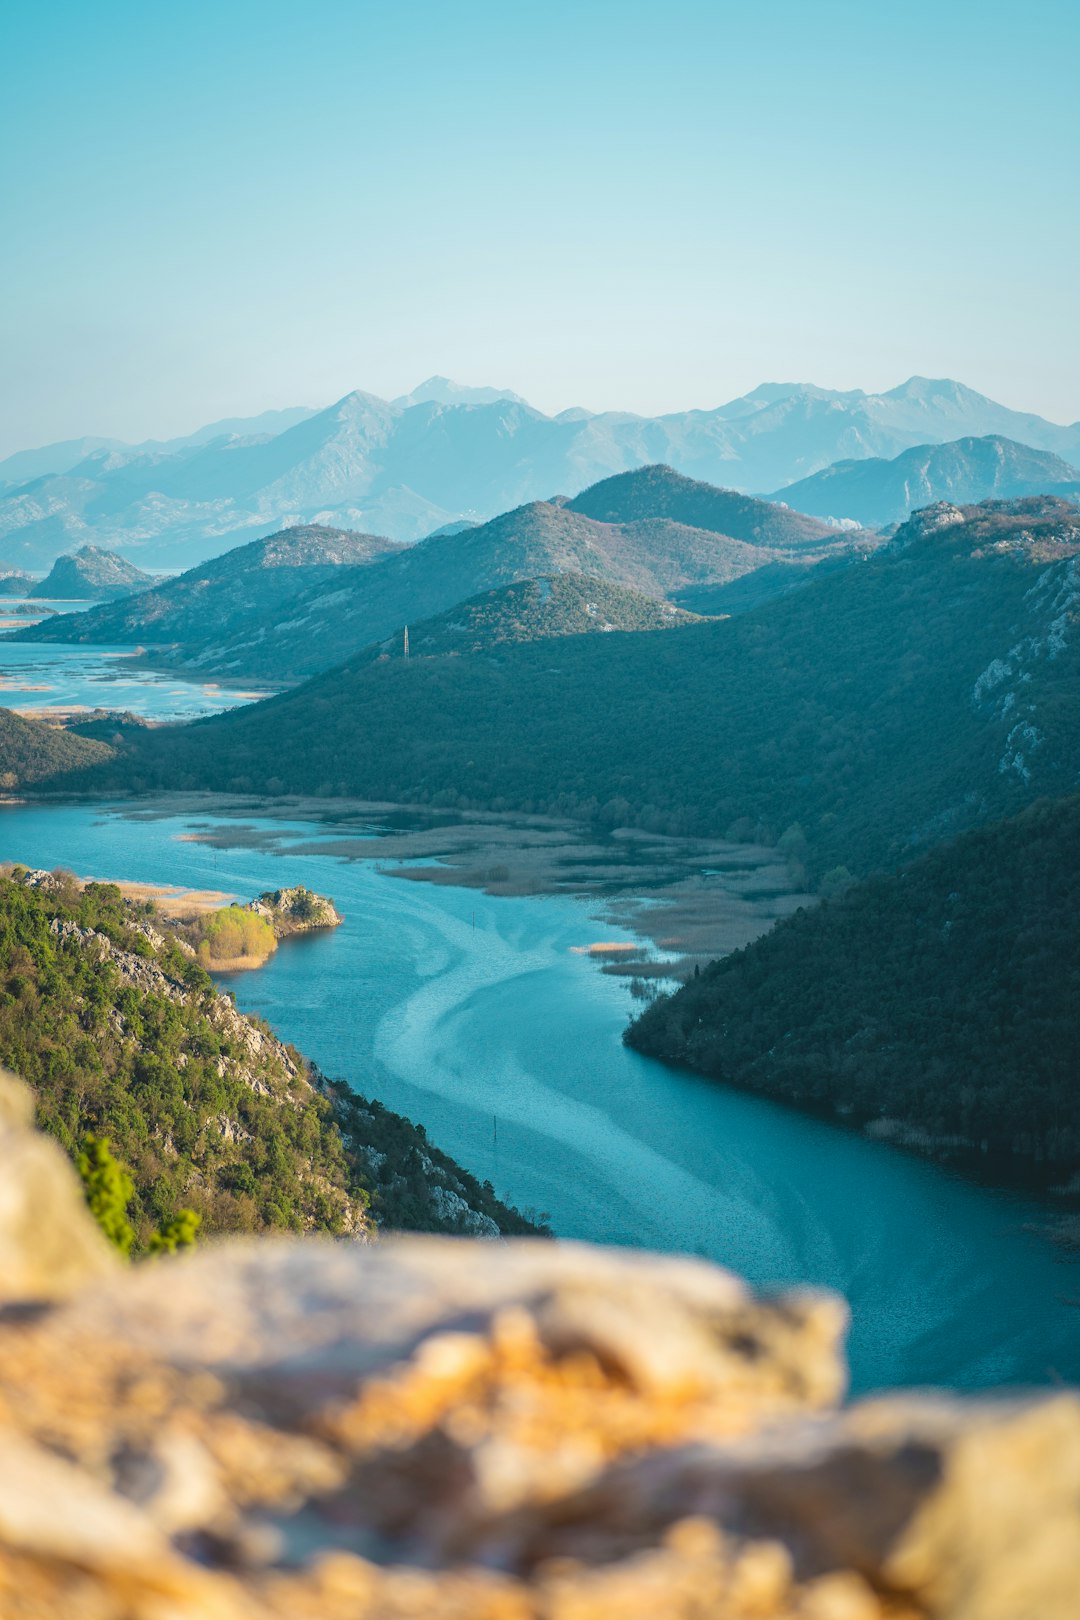 Cinematic photo of Skopje’s Lake Kanderjash, view from the top overlooking the lake and surrounding mountains, blue sky, turquoise waters, surrounded by greenery, natural landscape photography, Canon EOS1D X Mark III with an EF lens for landscape photography, –ar 85:128